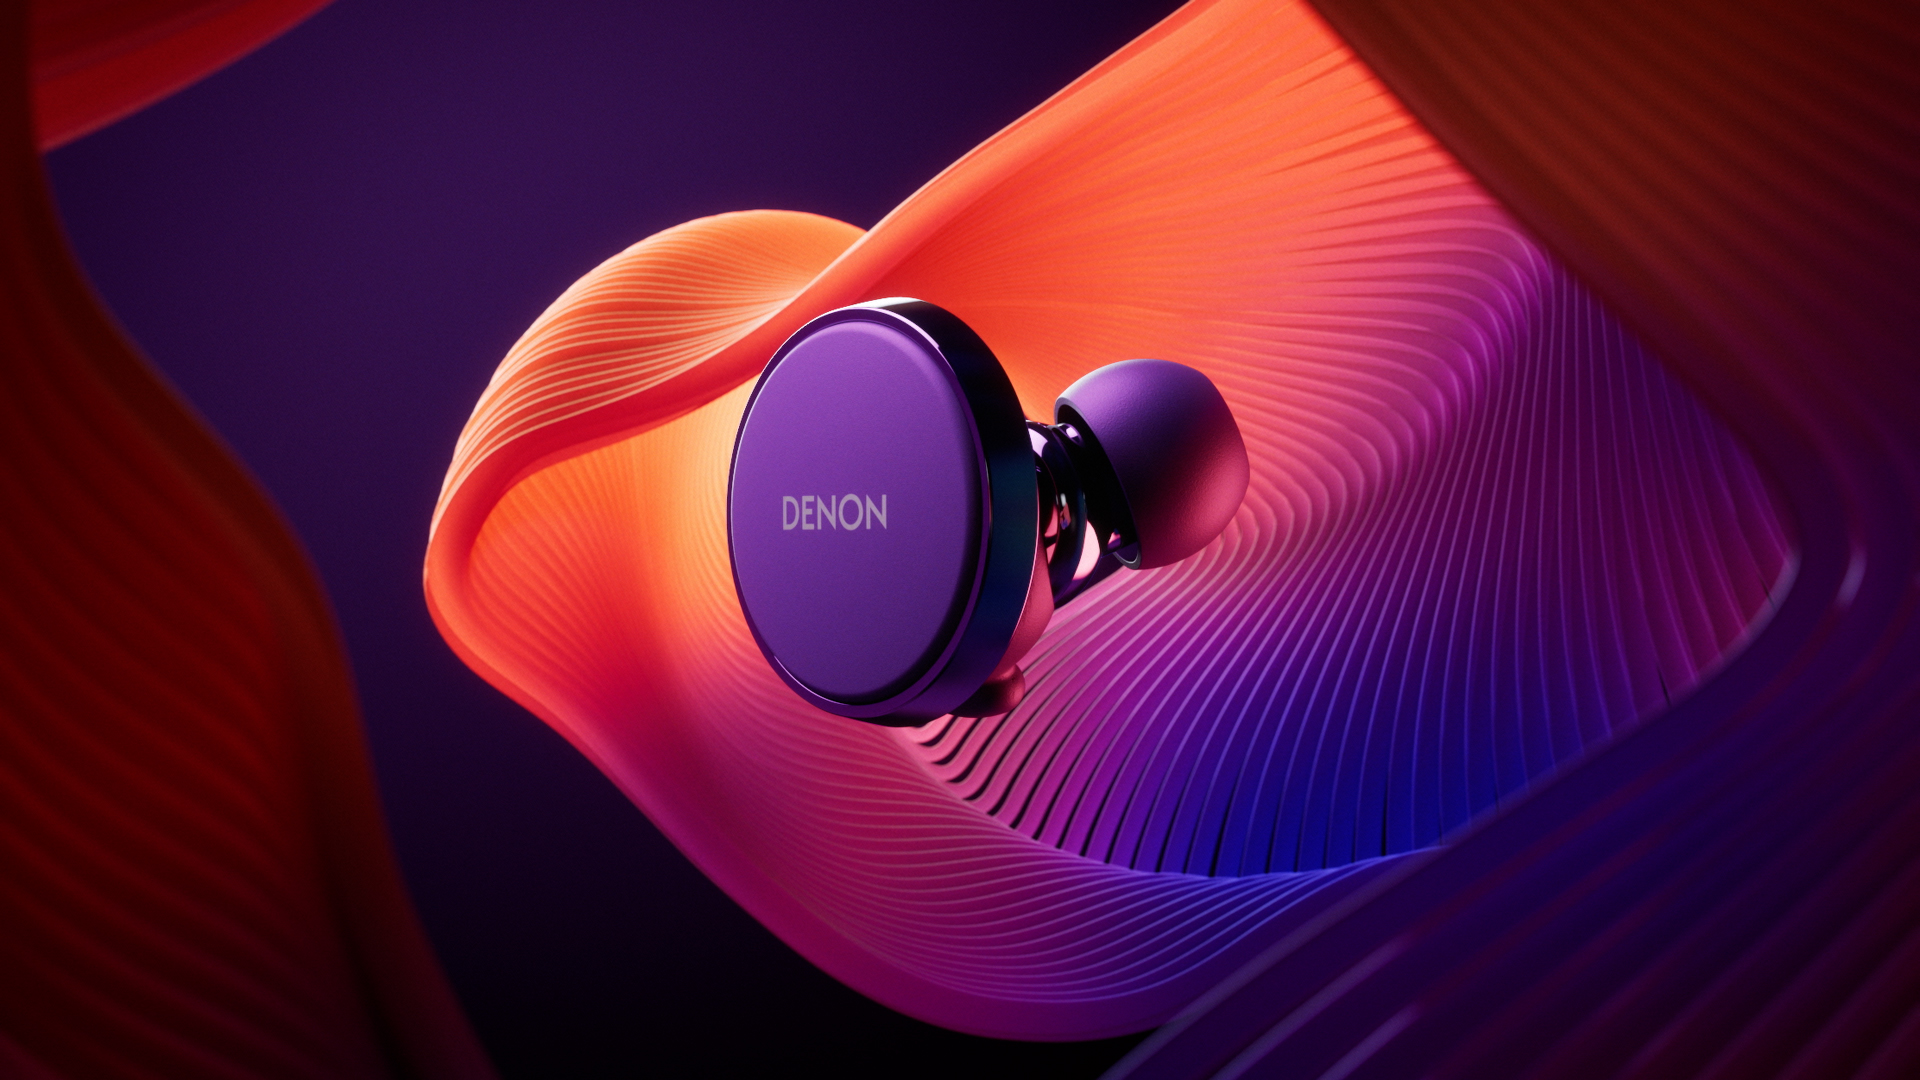 Win a pair of Denon PerL Pro Earbuds and experience the ultimate personalised listening experience